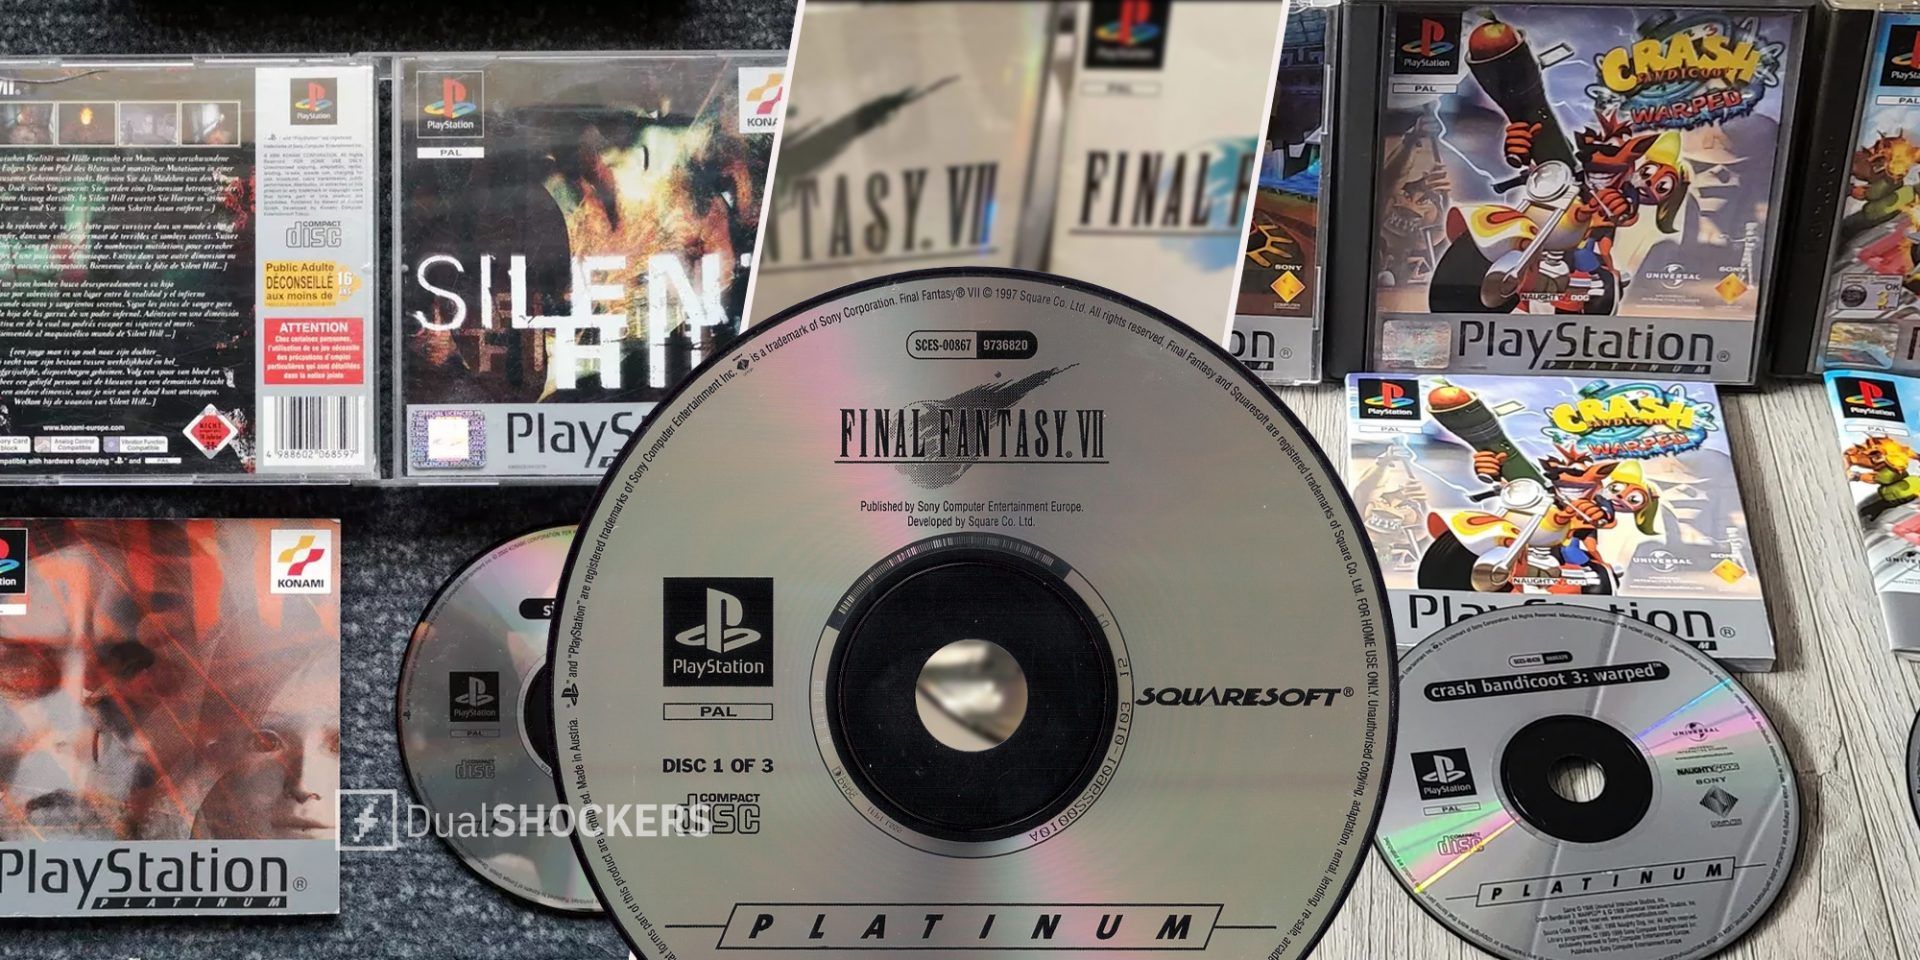 My current PlayStation 1 Platinum collection. Some good titles